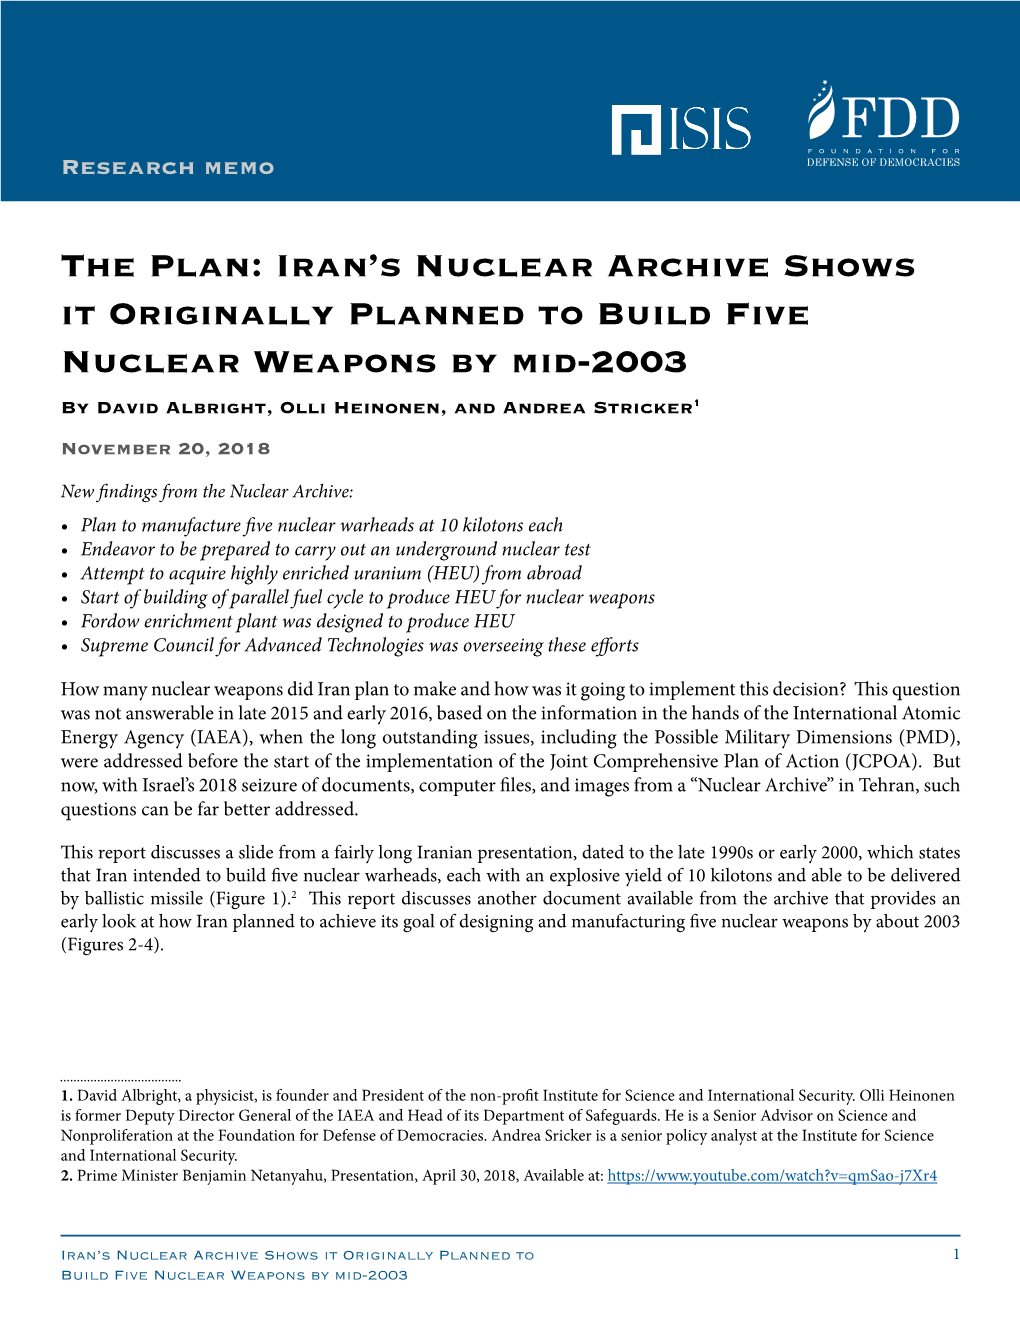 Iran's Nuclear Archive Shows It Originally Planned to Build Five